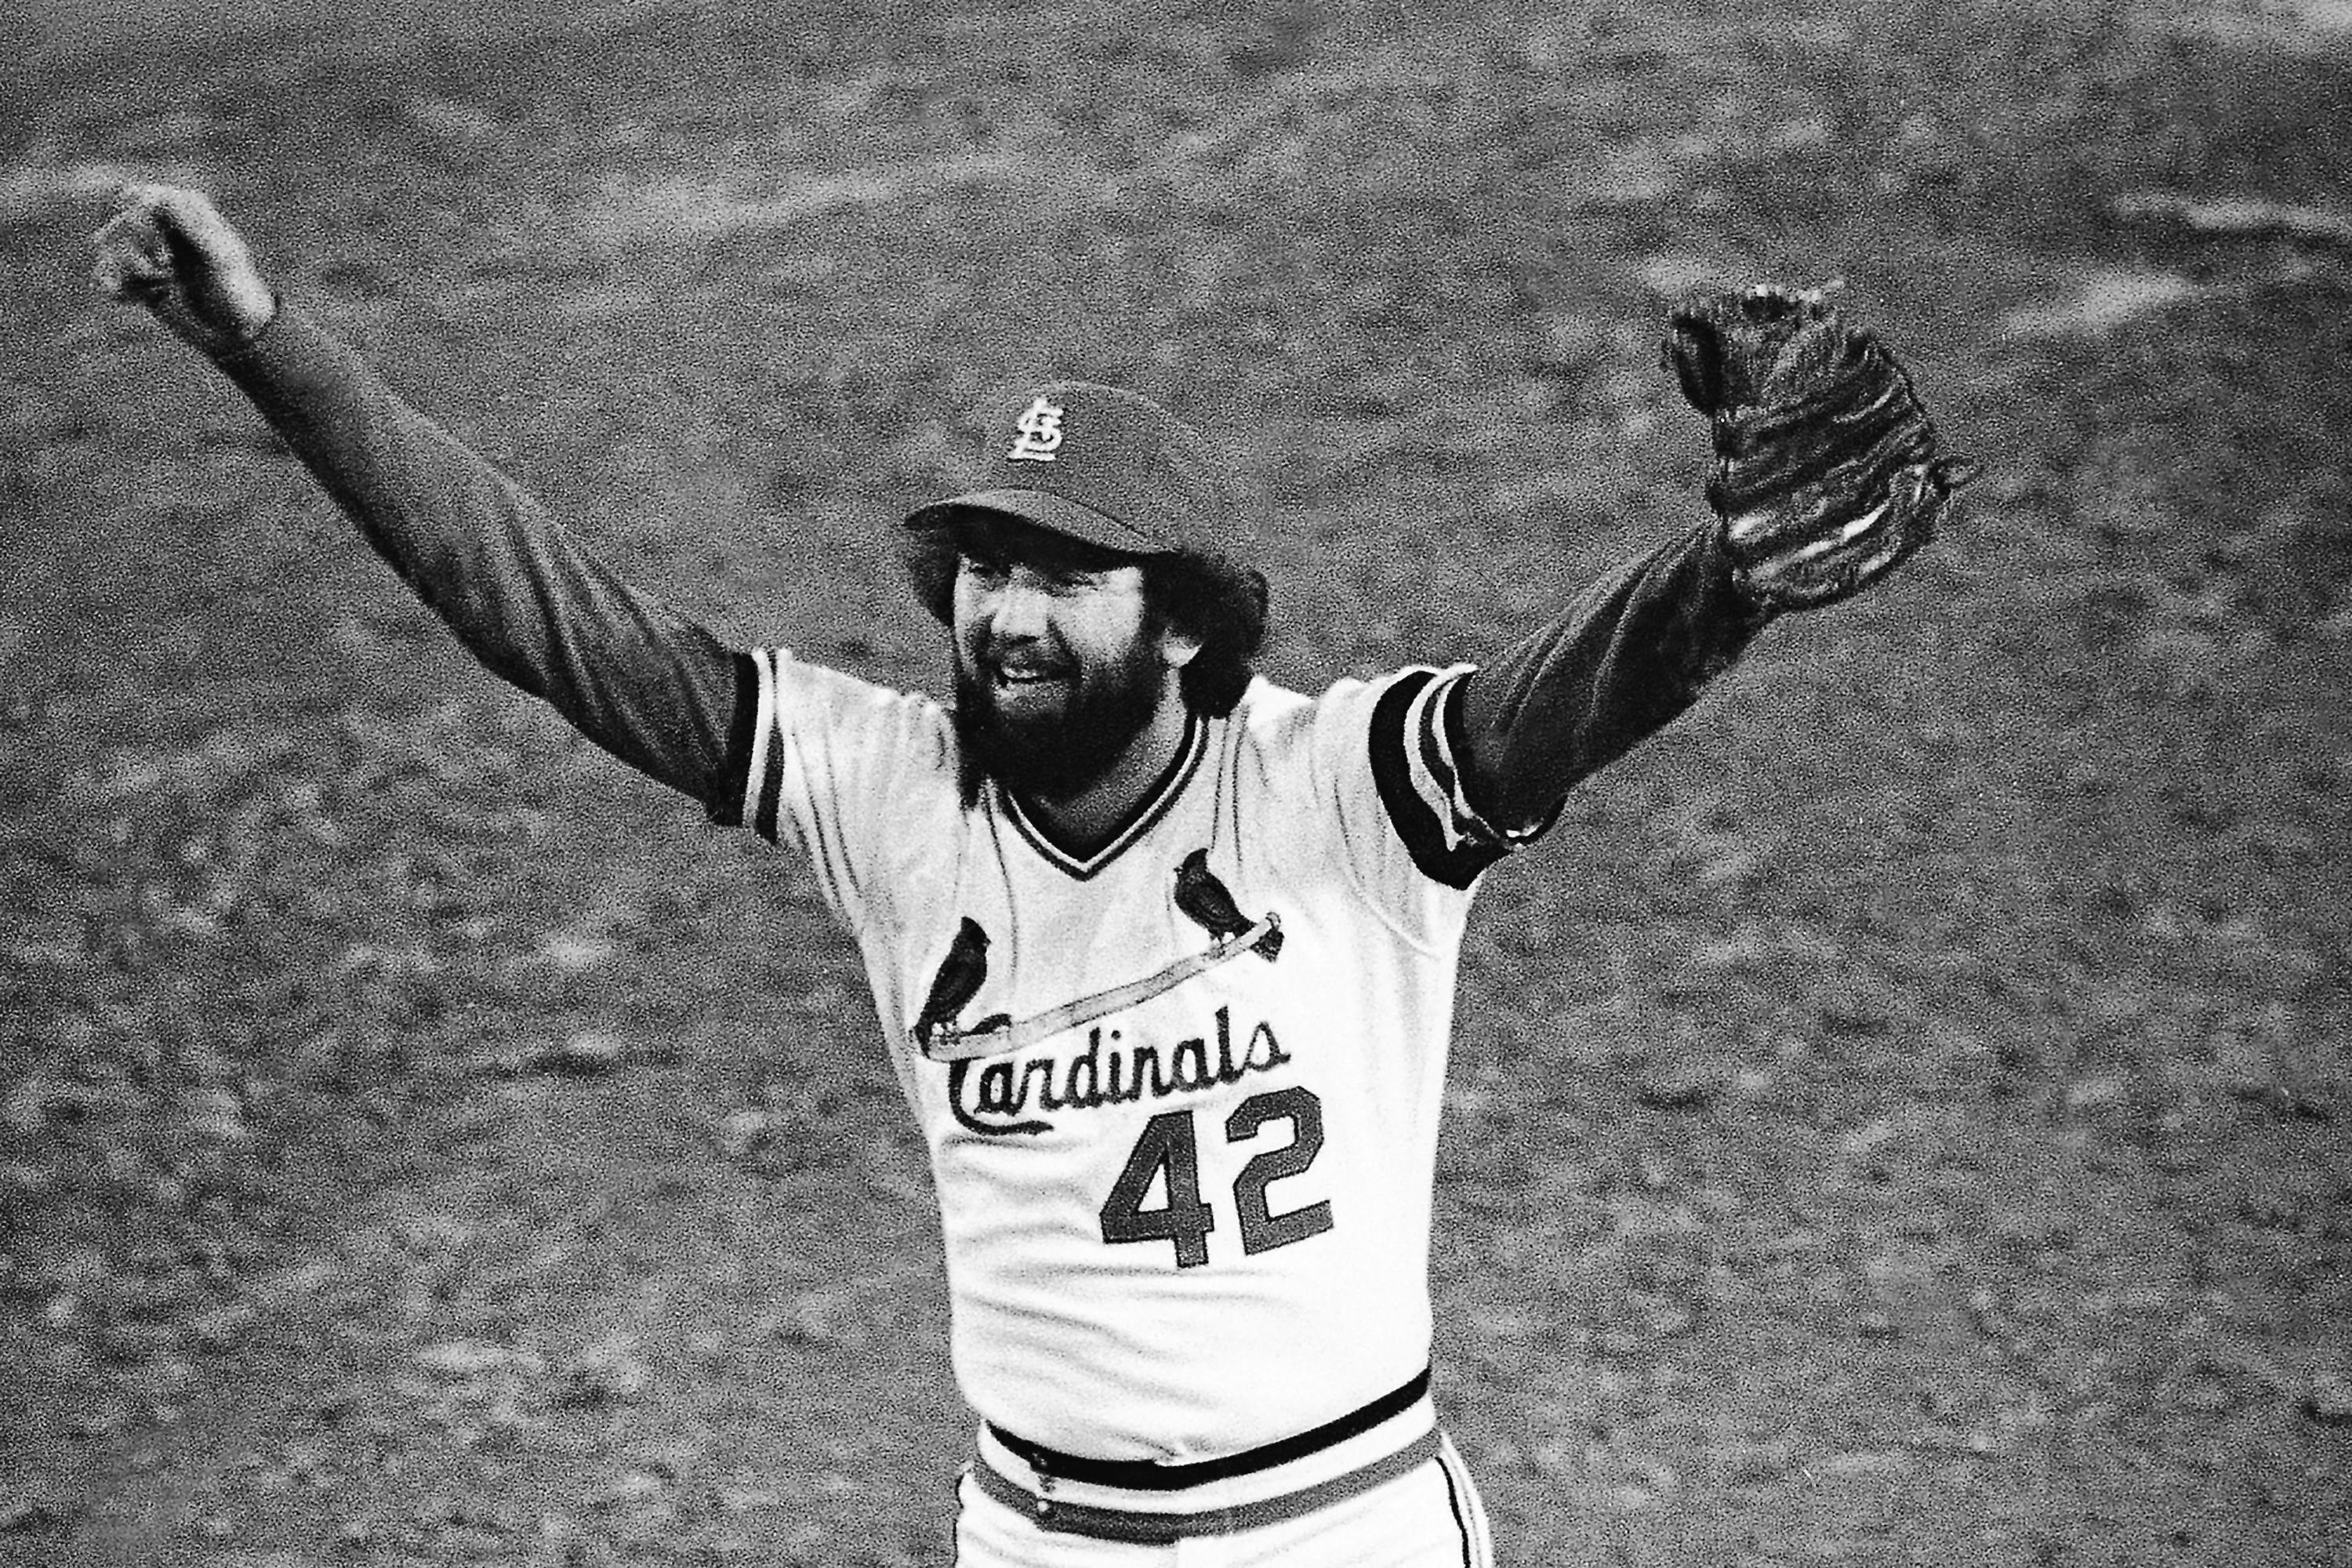 Bruce Sutter, Hall of Famer and Cy Young winner, dies at 69